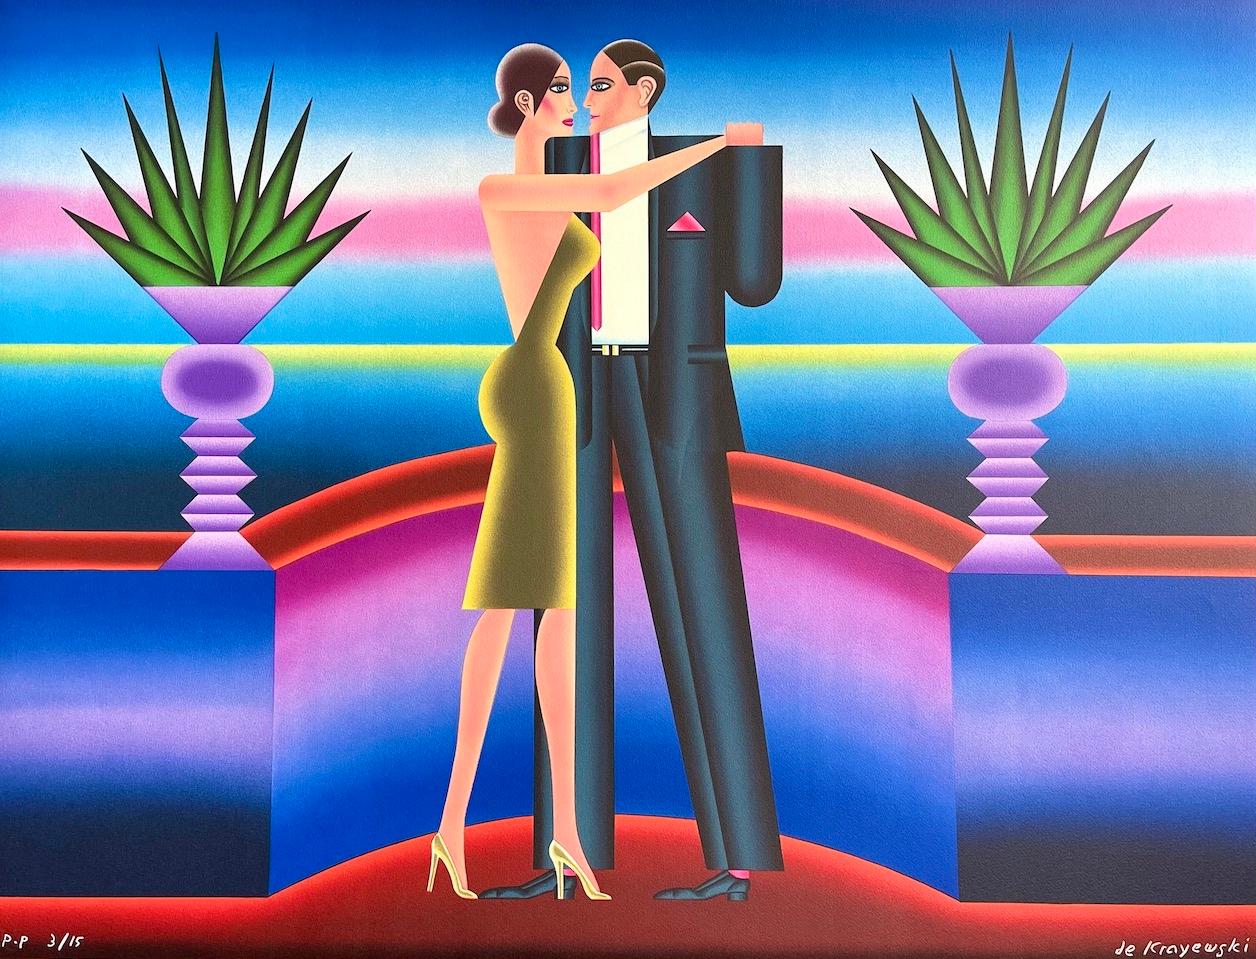 THE DANCE Signed Lithograph, Dancing Couple, Art Deco Interior, Polish Artist